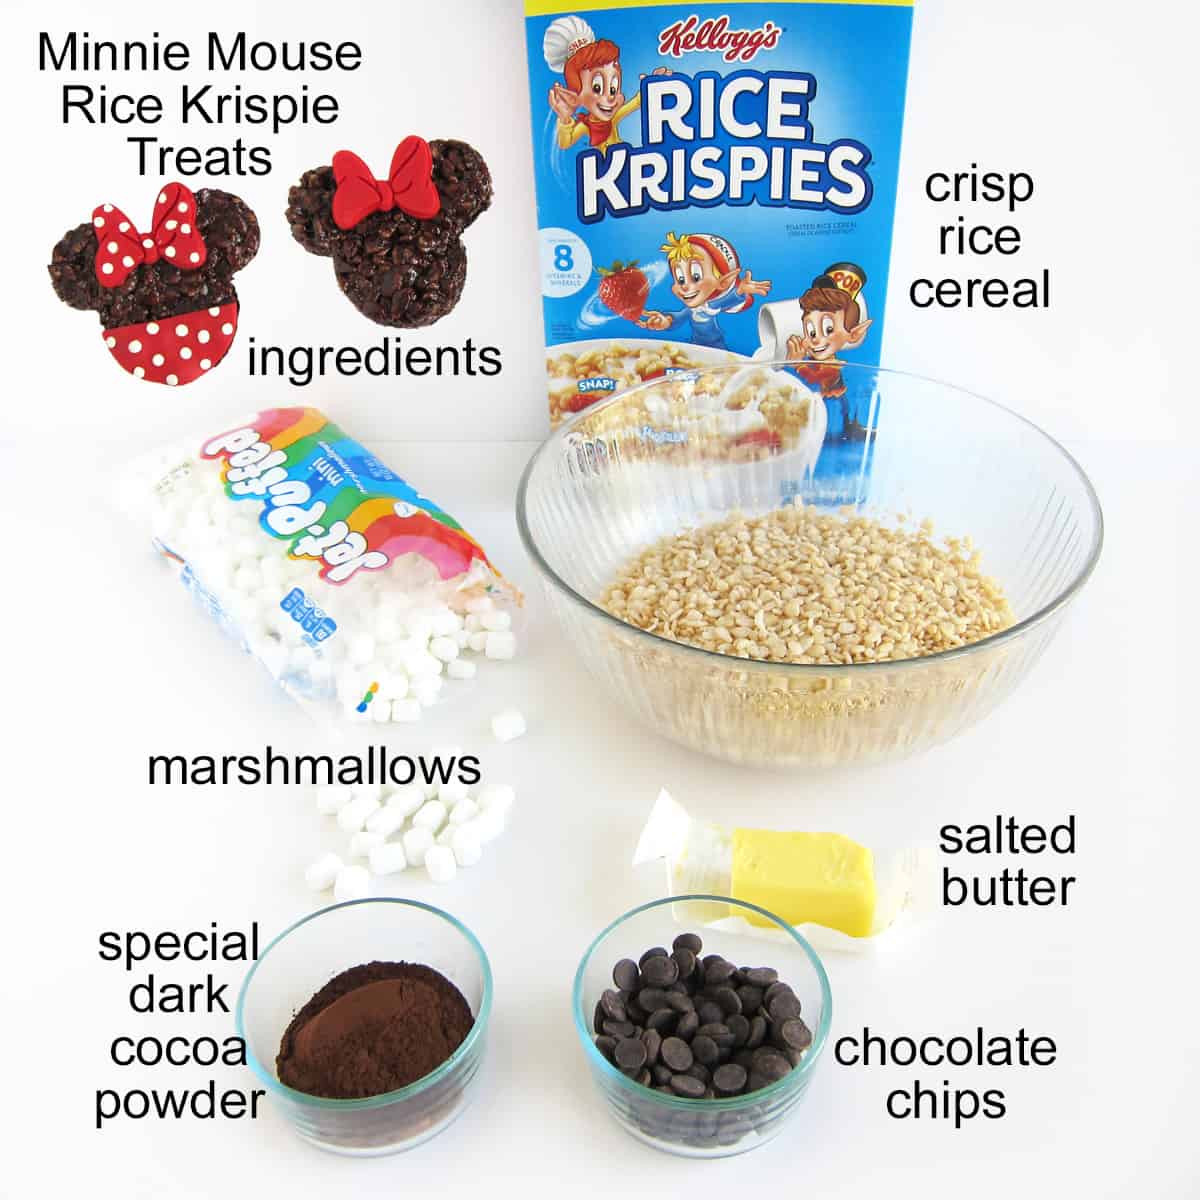 Minnie Mouse Rice Treats ingredients indcluding Rice Krispies, marshmallows, butter, cocoa powder, and chocolate chips